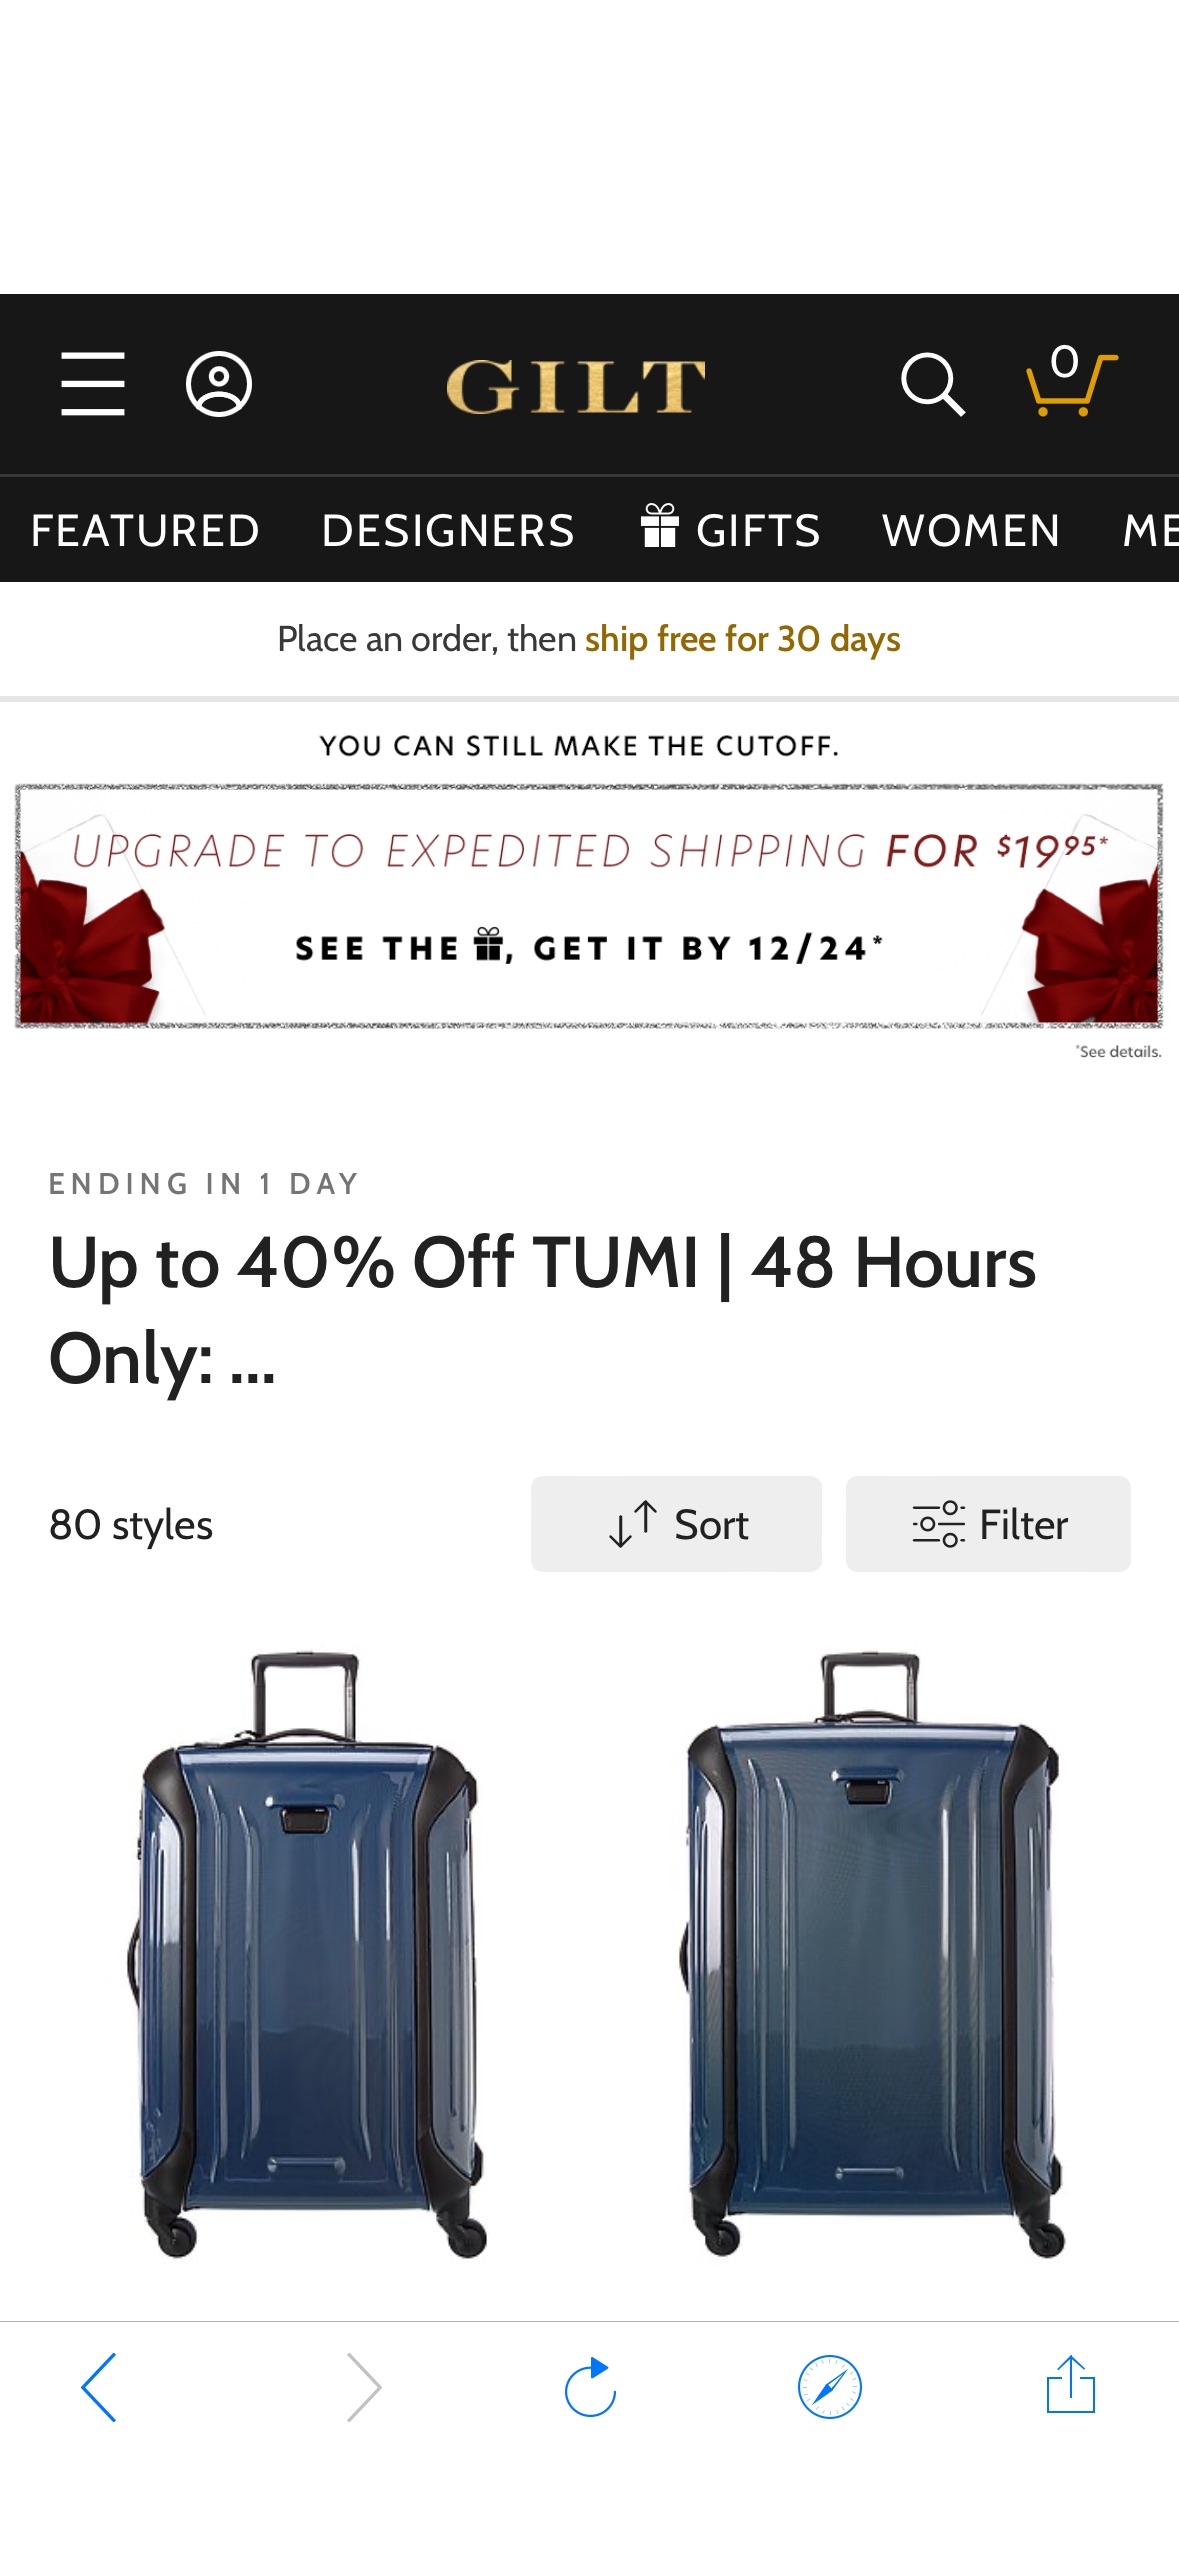 Up to 40% Off TUMI | 48 Hours Only: ... / Gilt